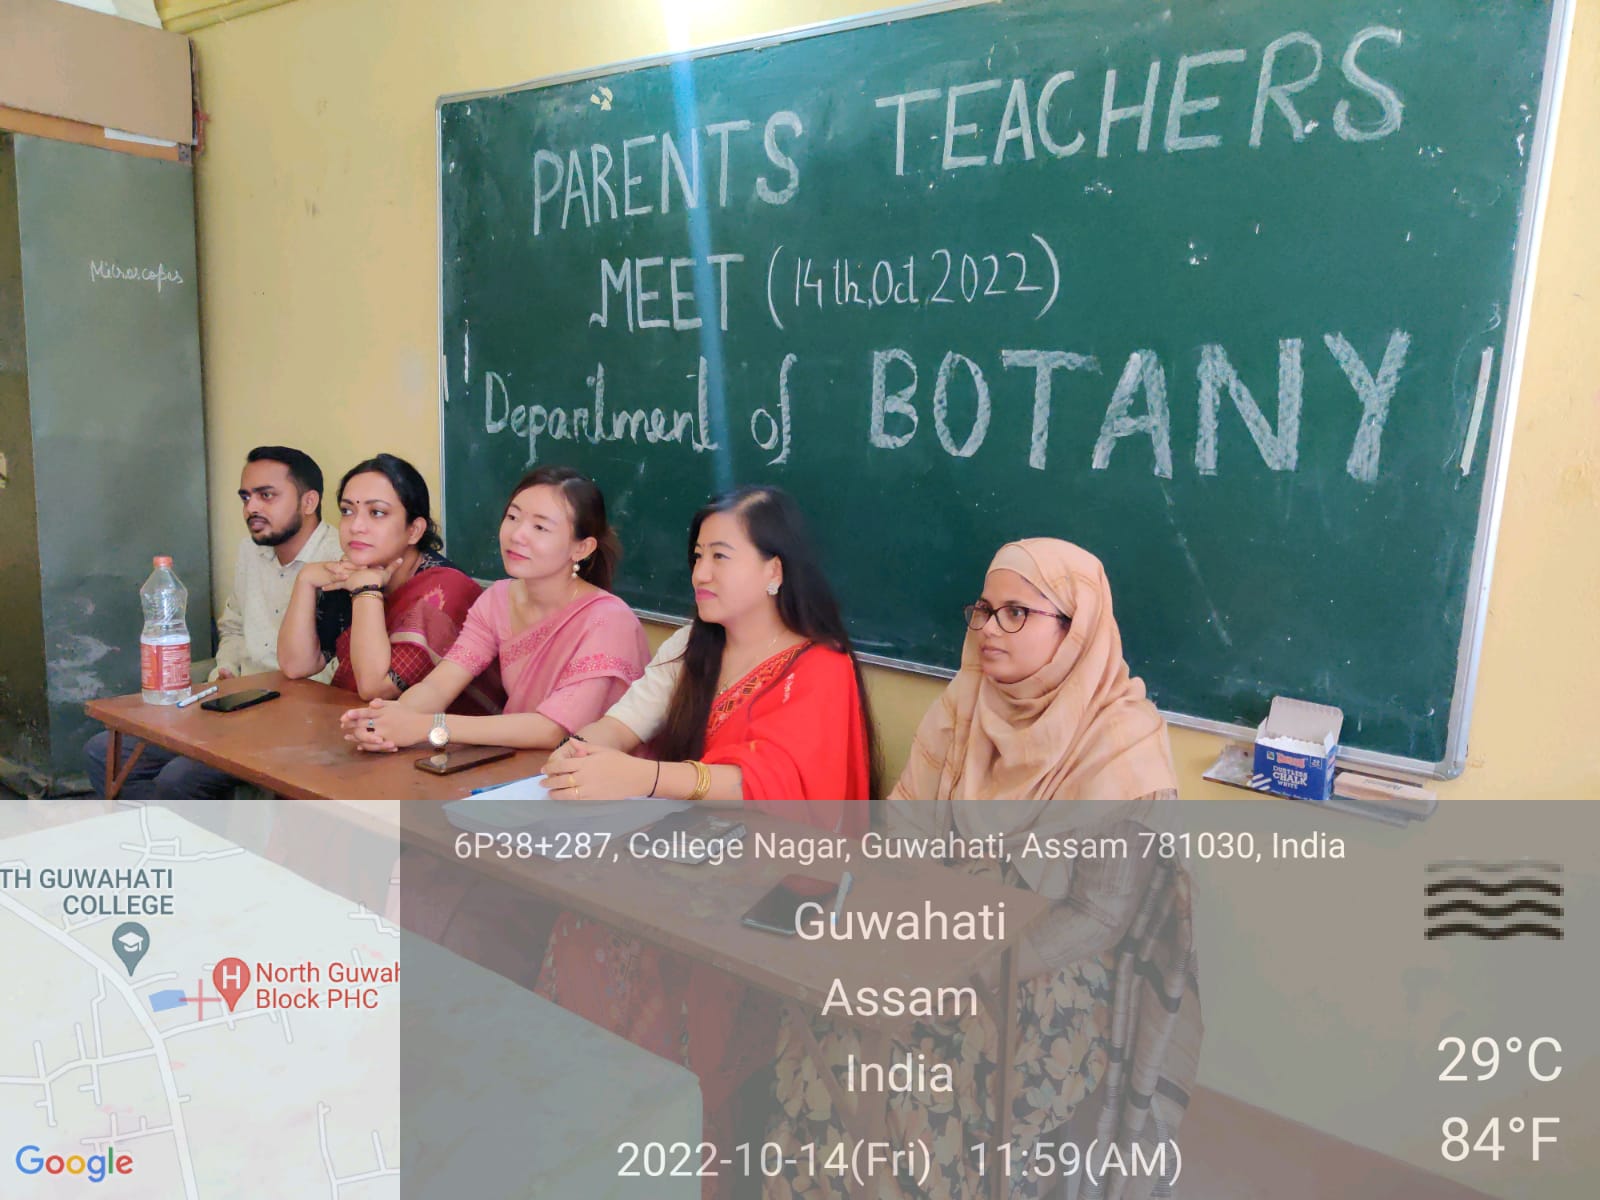 Parents-Teachers Meeting held at Department of Botany on 14th October, 2022